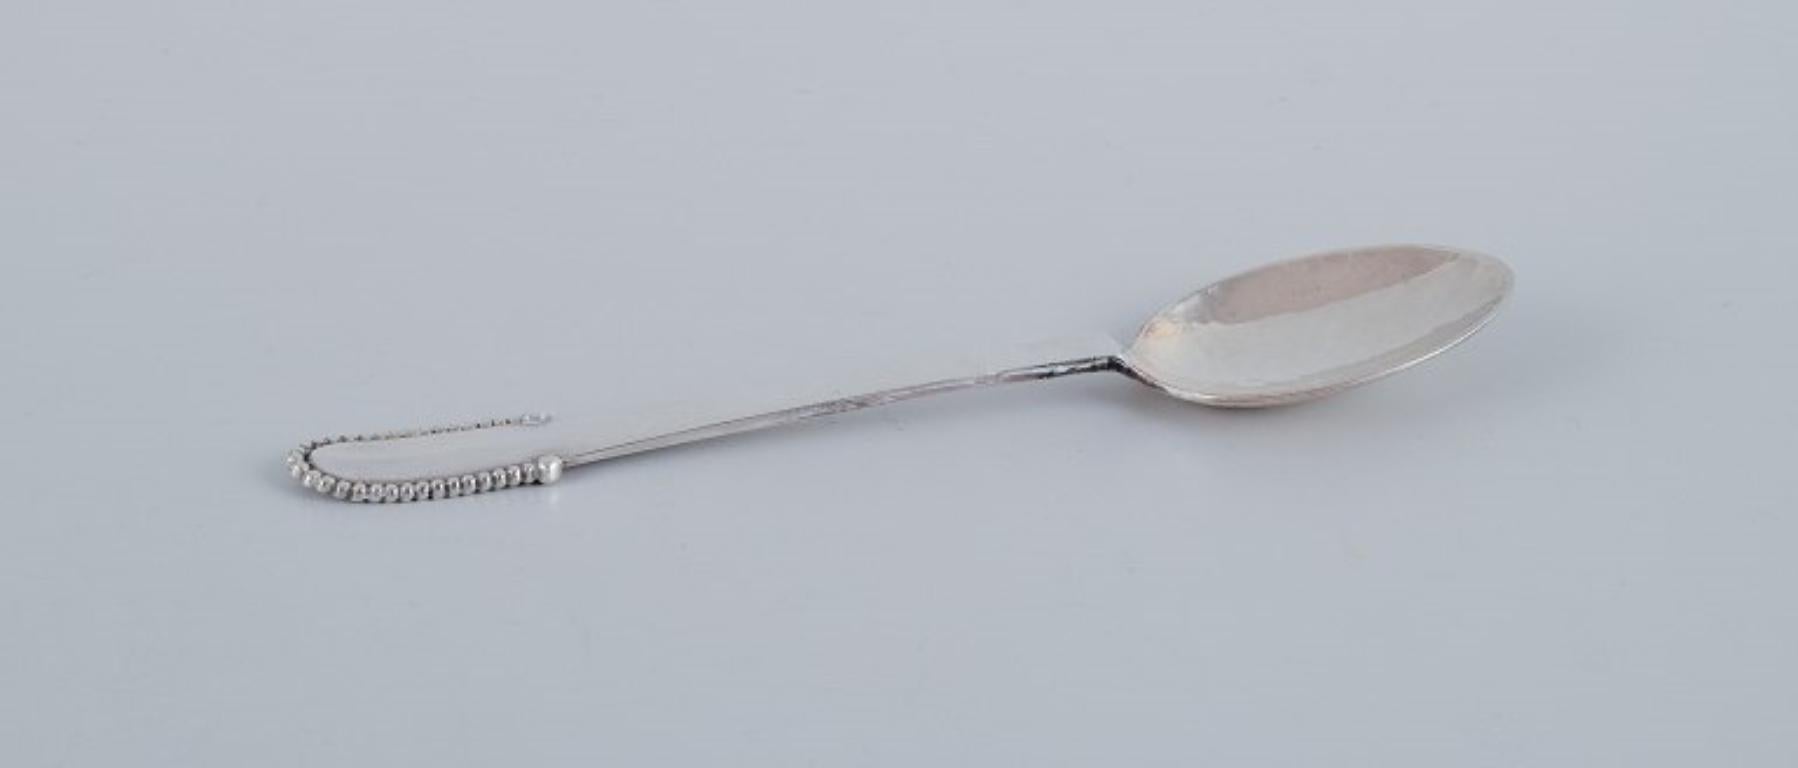 Georg Jensen Beaded.
A set of eight teaspoons in sterling silver.
Post 1945 hallmark.
In excellent condition.
Dimensions: L 13.9 cm.